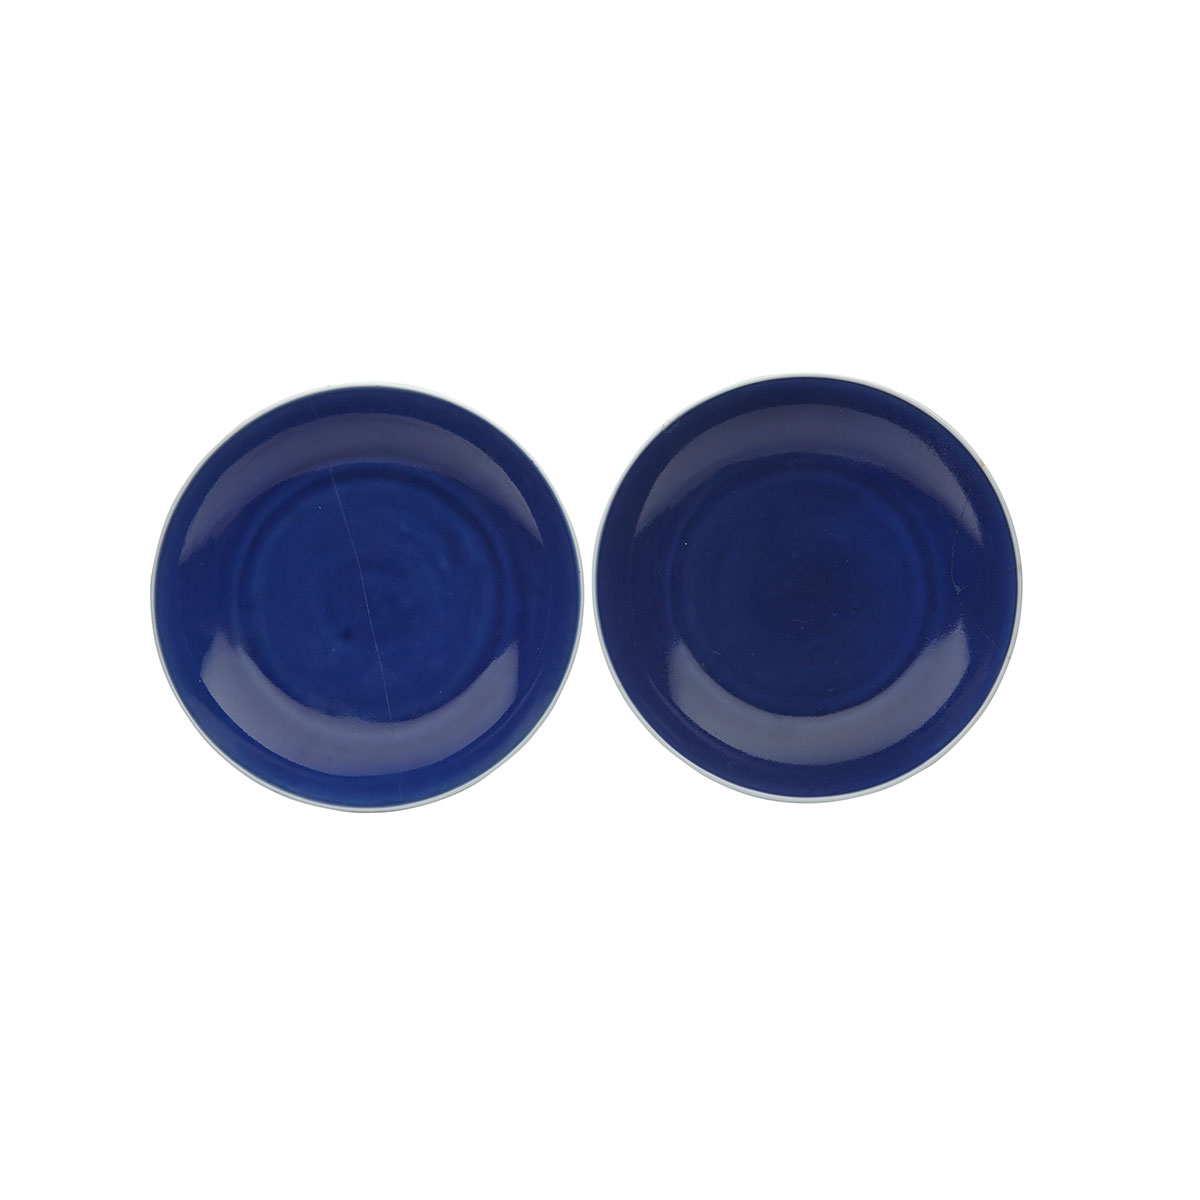 Pair of Sacrificial Blue Dishes, Kangxi Mark and Period (1662-1722)